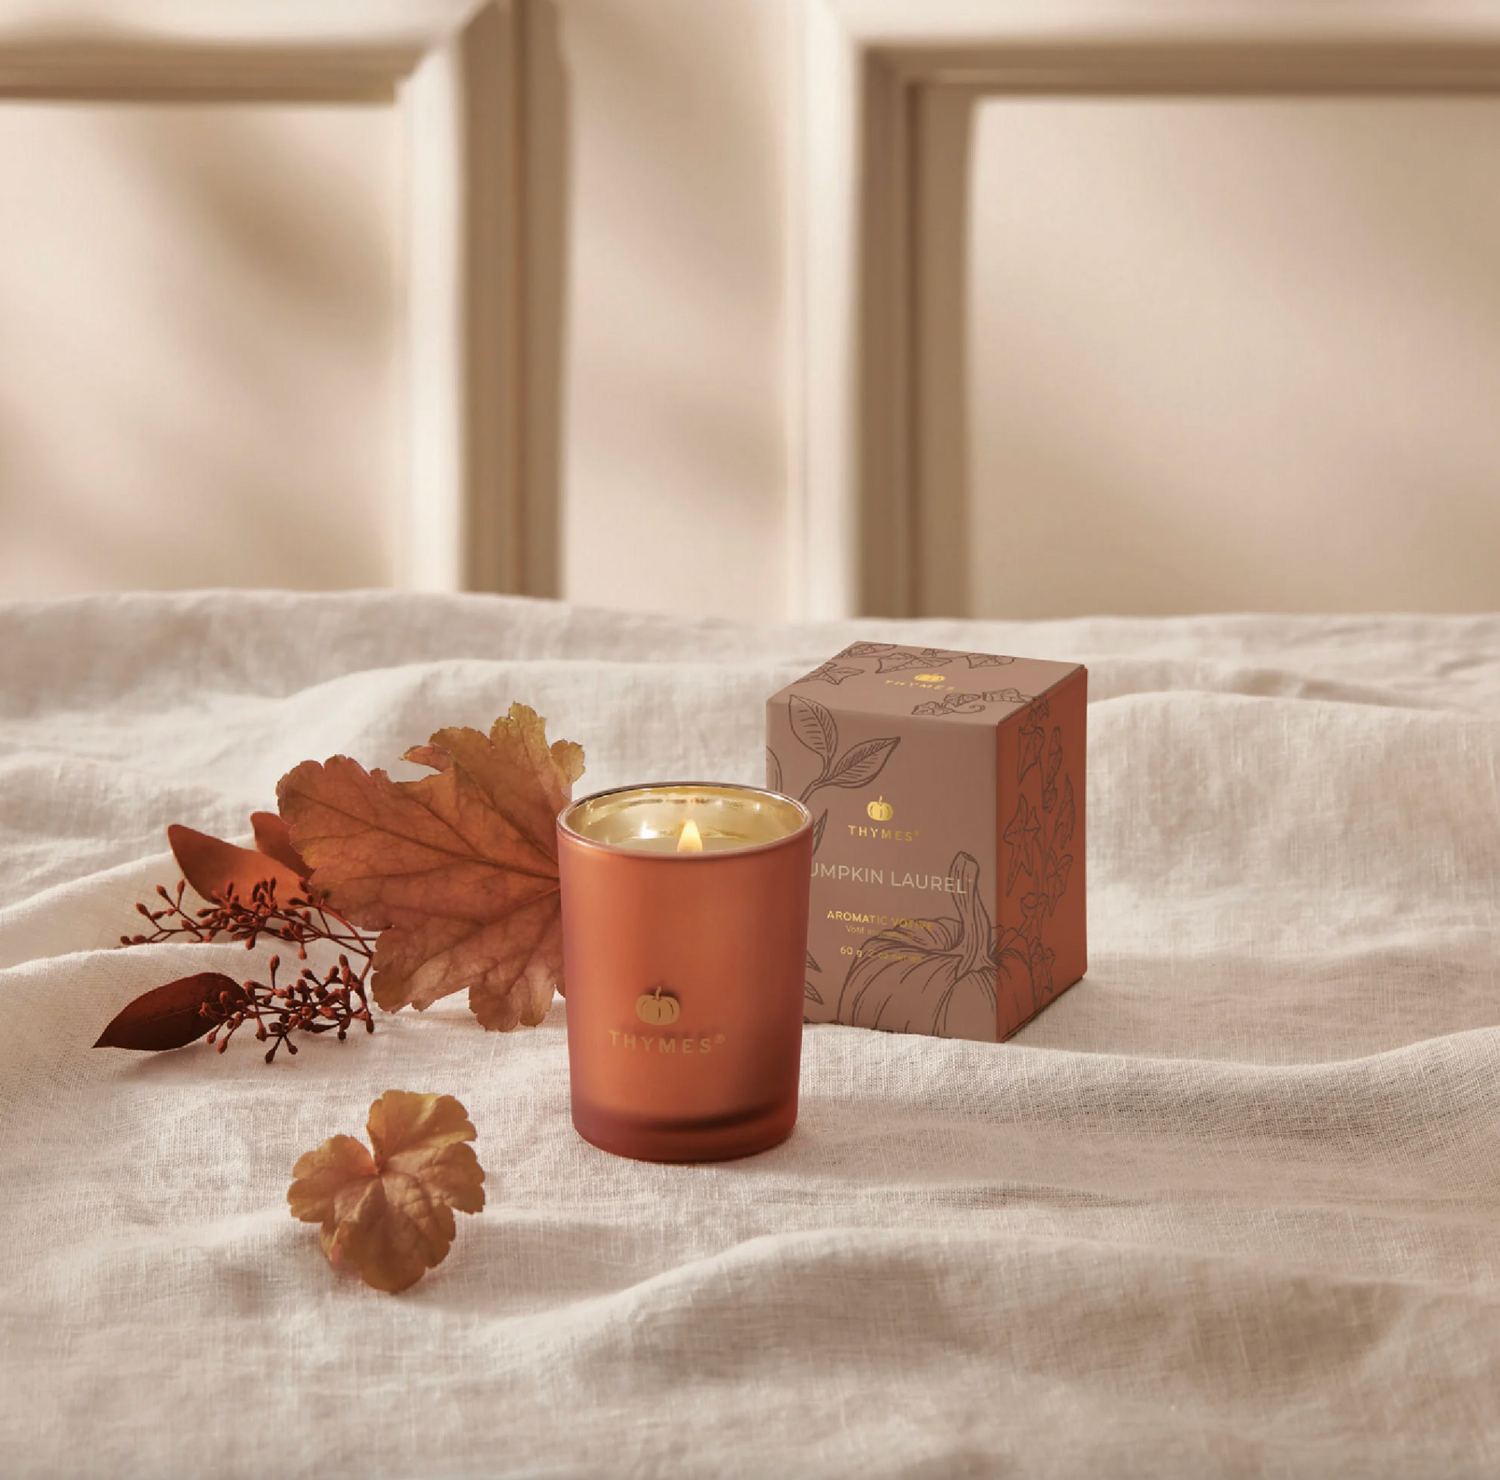 Thymes Pumpkin Laurel Votive Candle Candles in  at Wrapsody